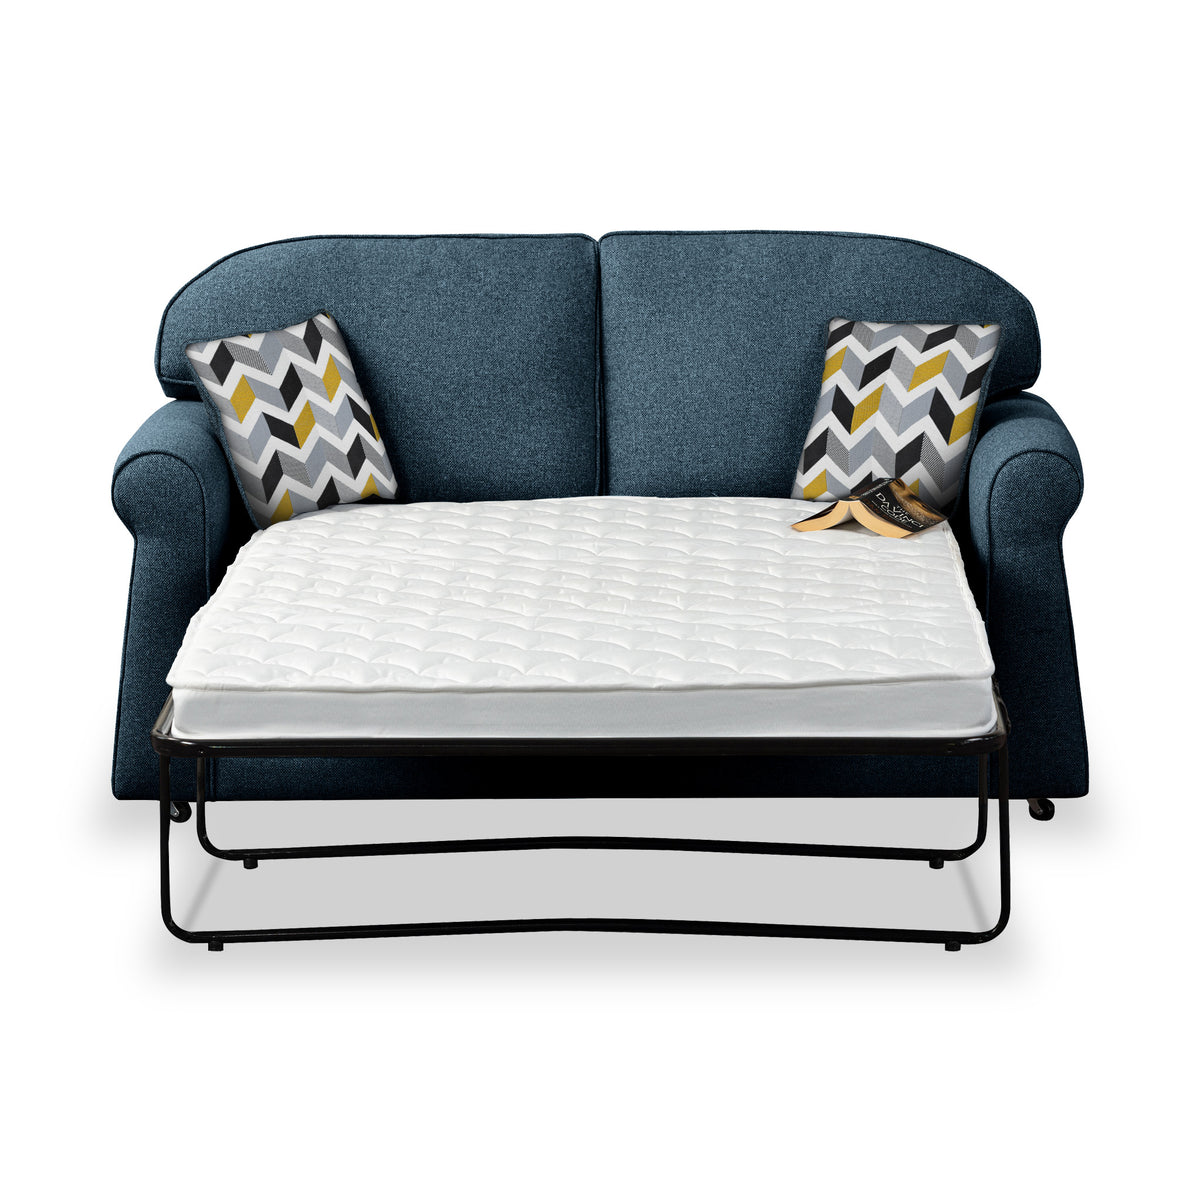 Giselle Midnight Soft Weave 2 Seater Sofabed with Mustard Scatter Cushions from Roseland Furniture